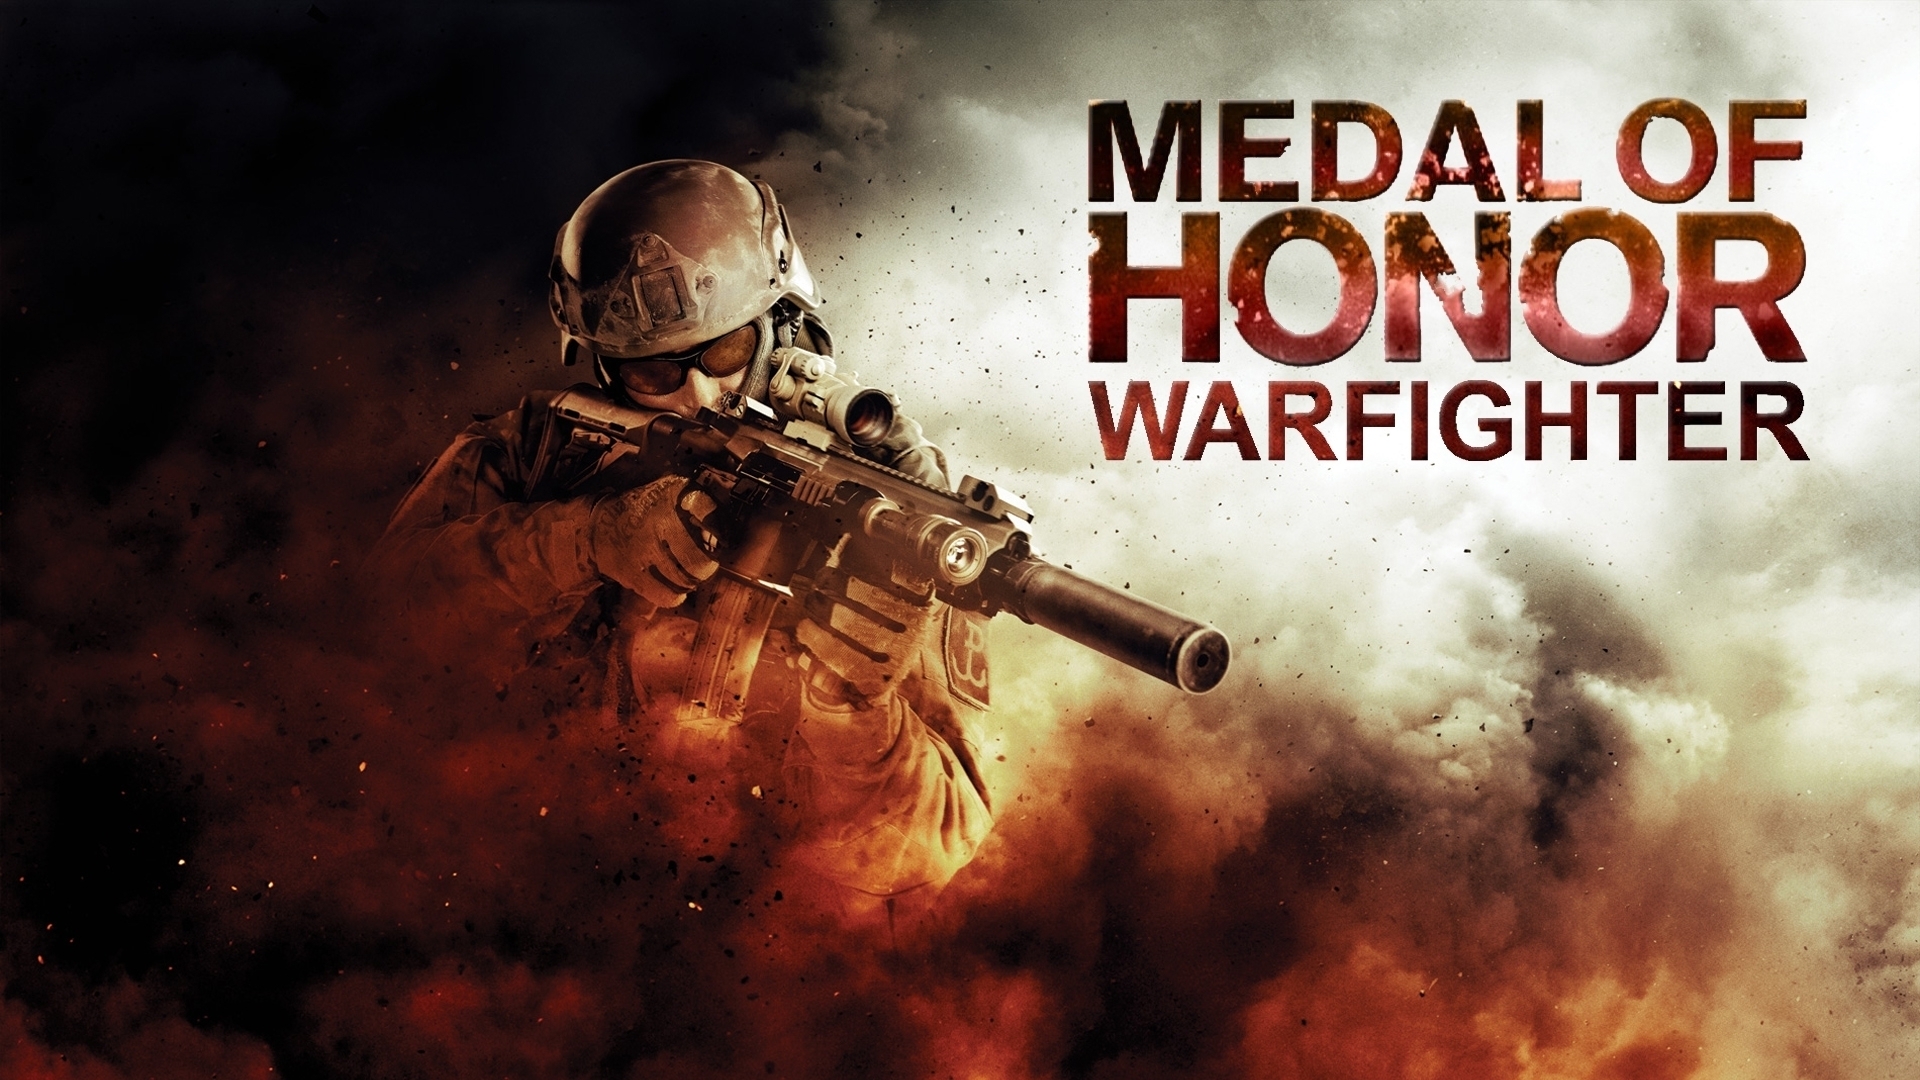 Warfighter 4K wallpapers for your desktop or mobile screen free and easy to  download